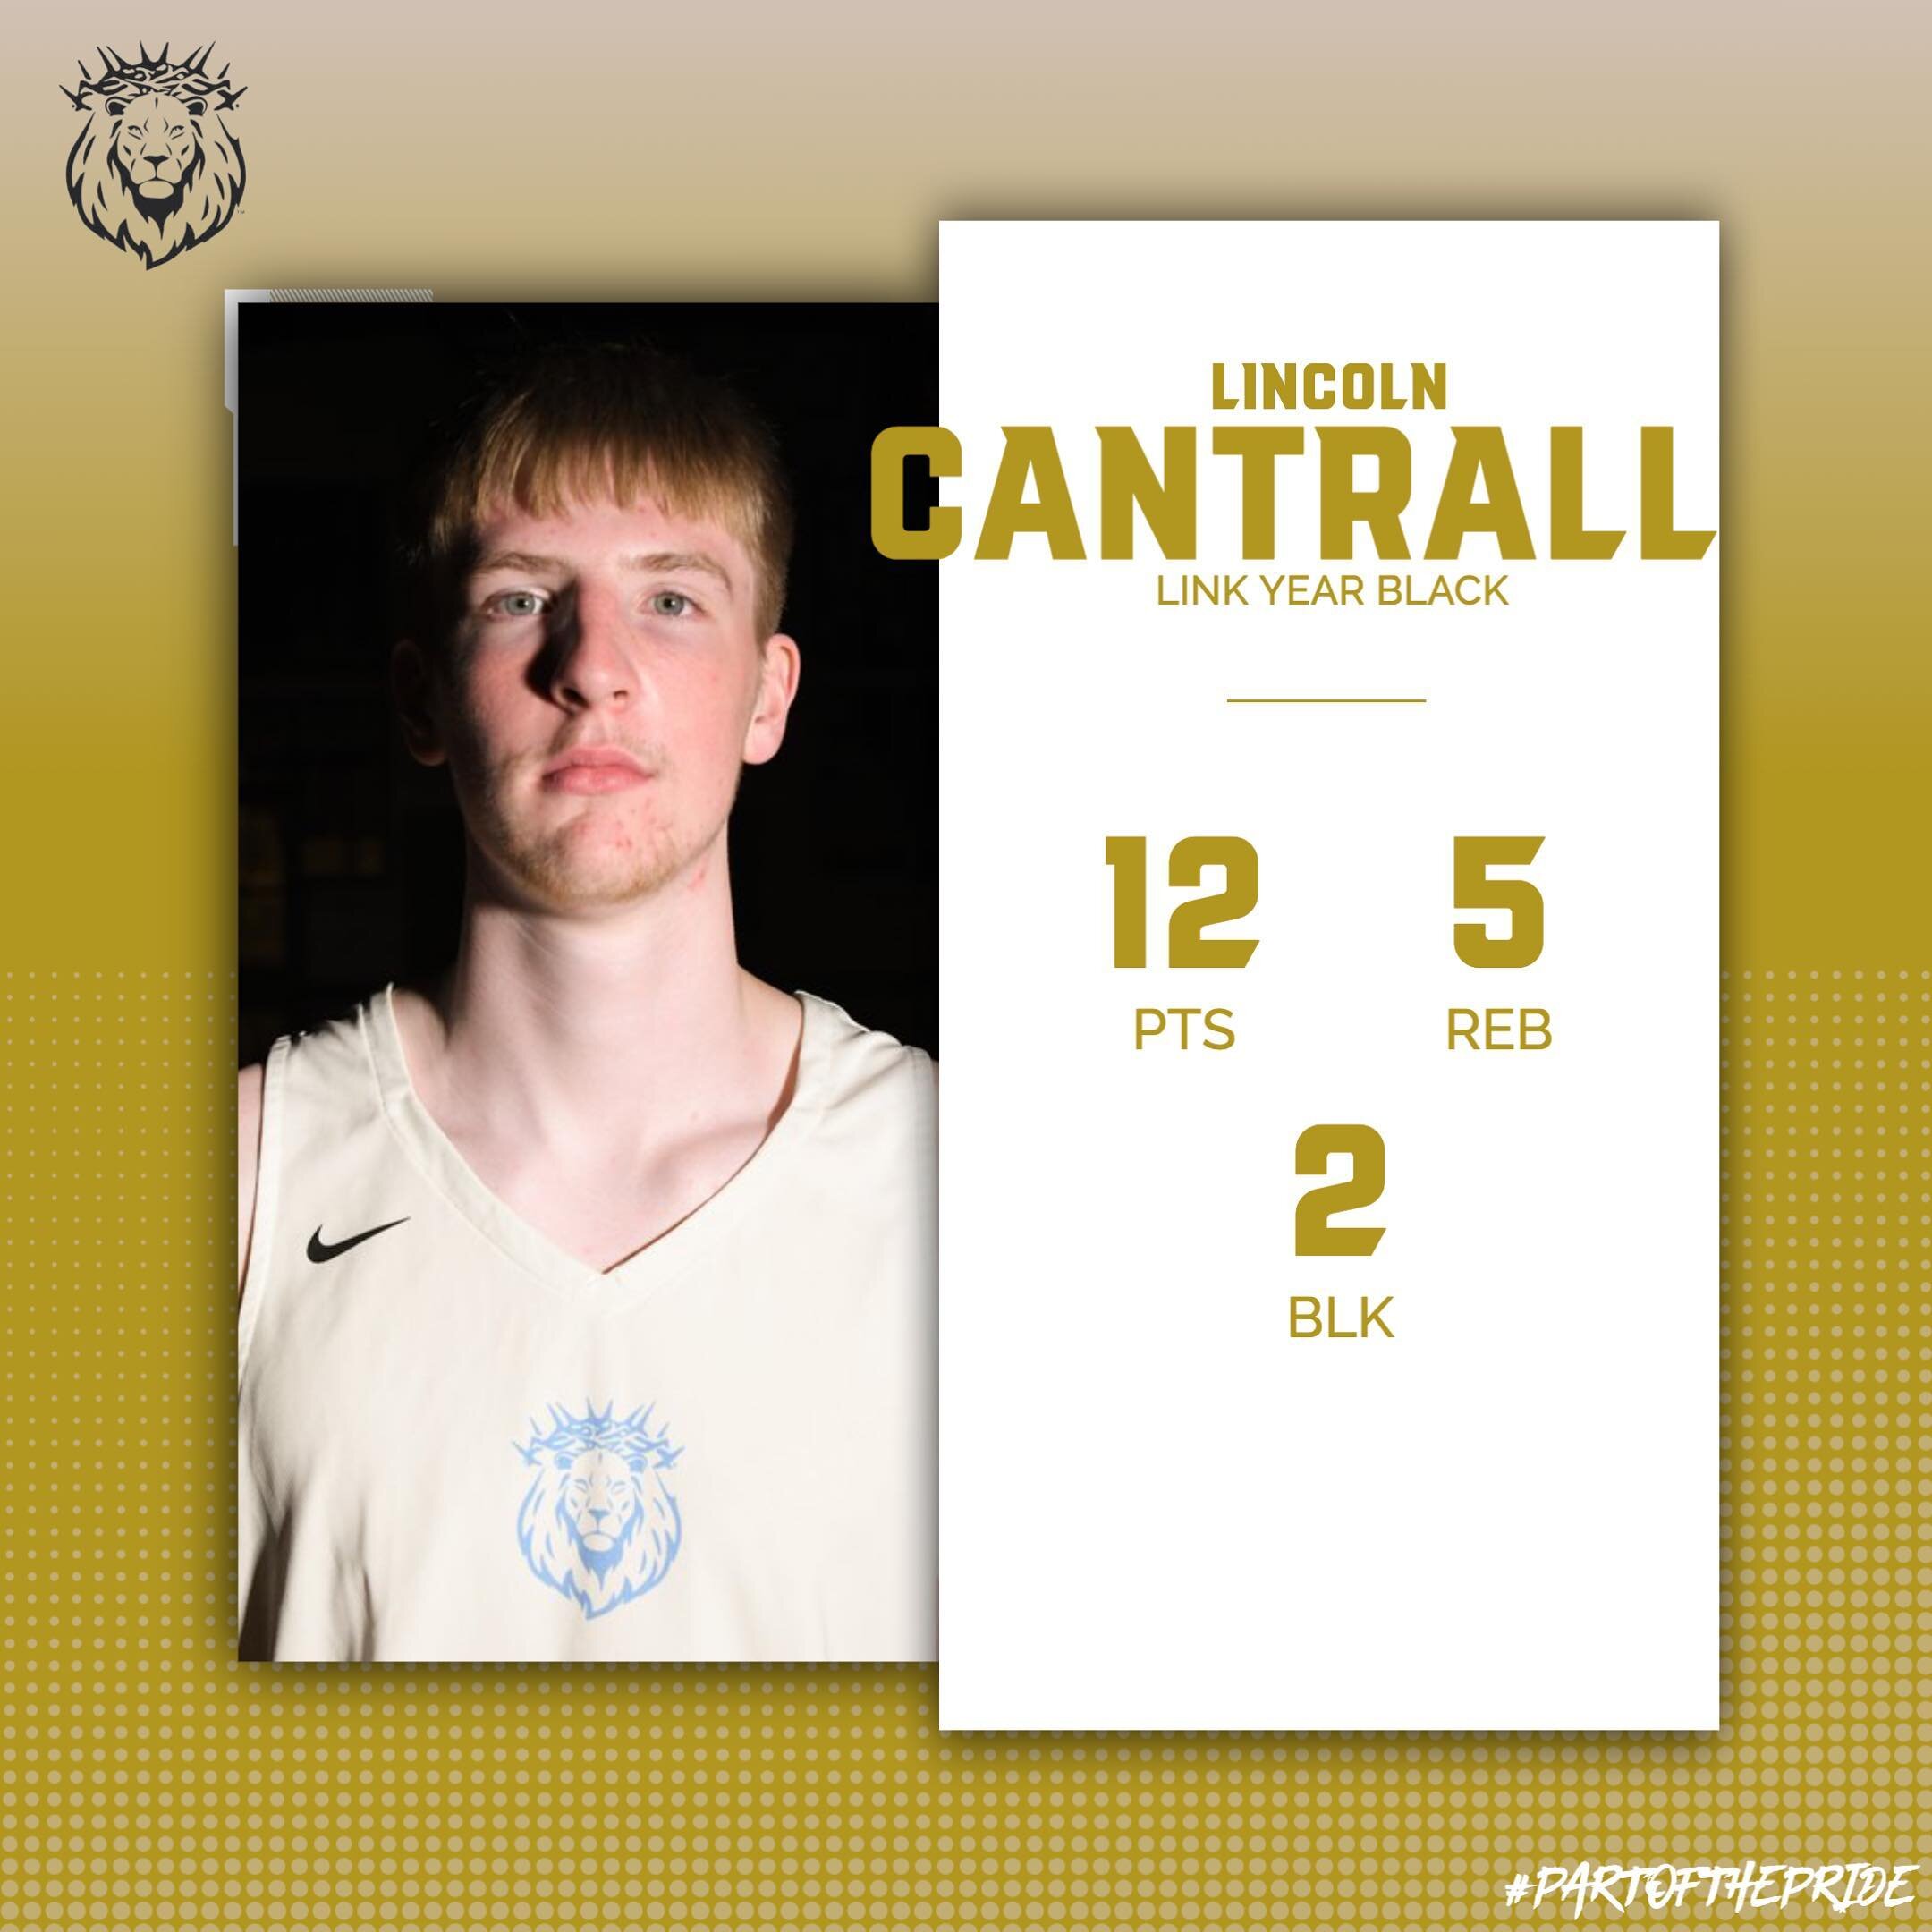 Lincoln Cantrall finished with 12 points, 5 Rebounds, and 2 blocks ✅

#PartOfThePride 🦁